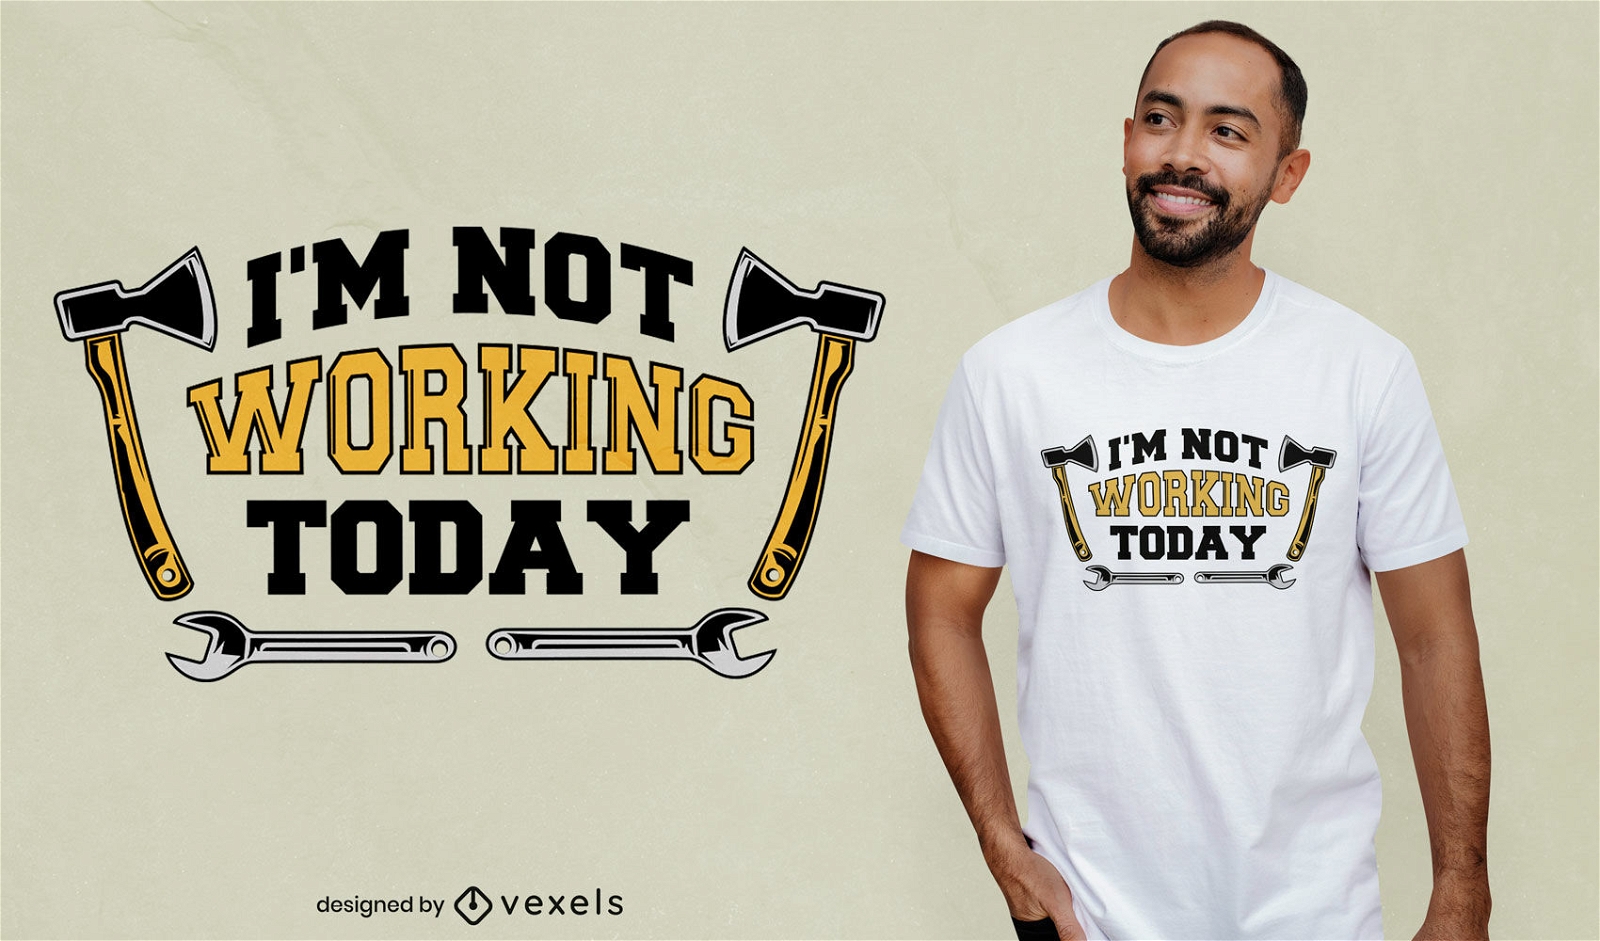 Not working today tools t-shirt design